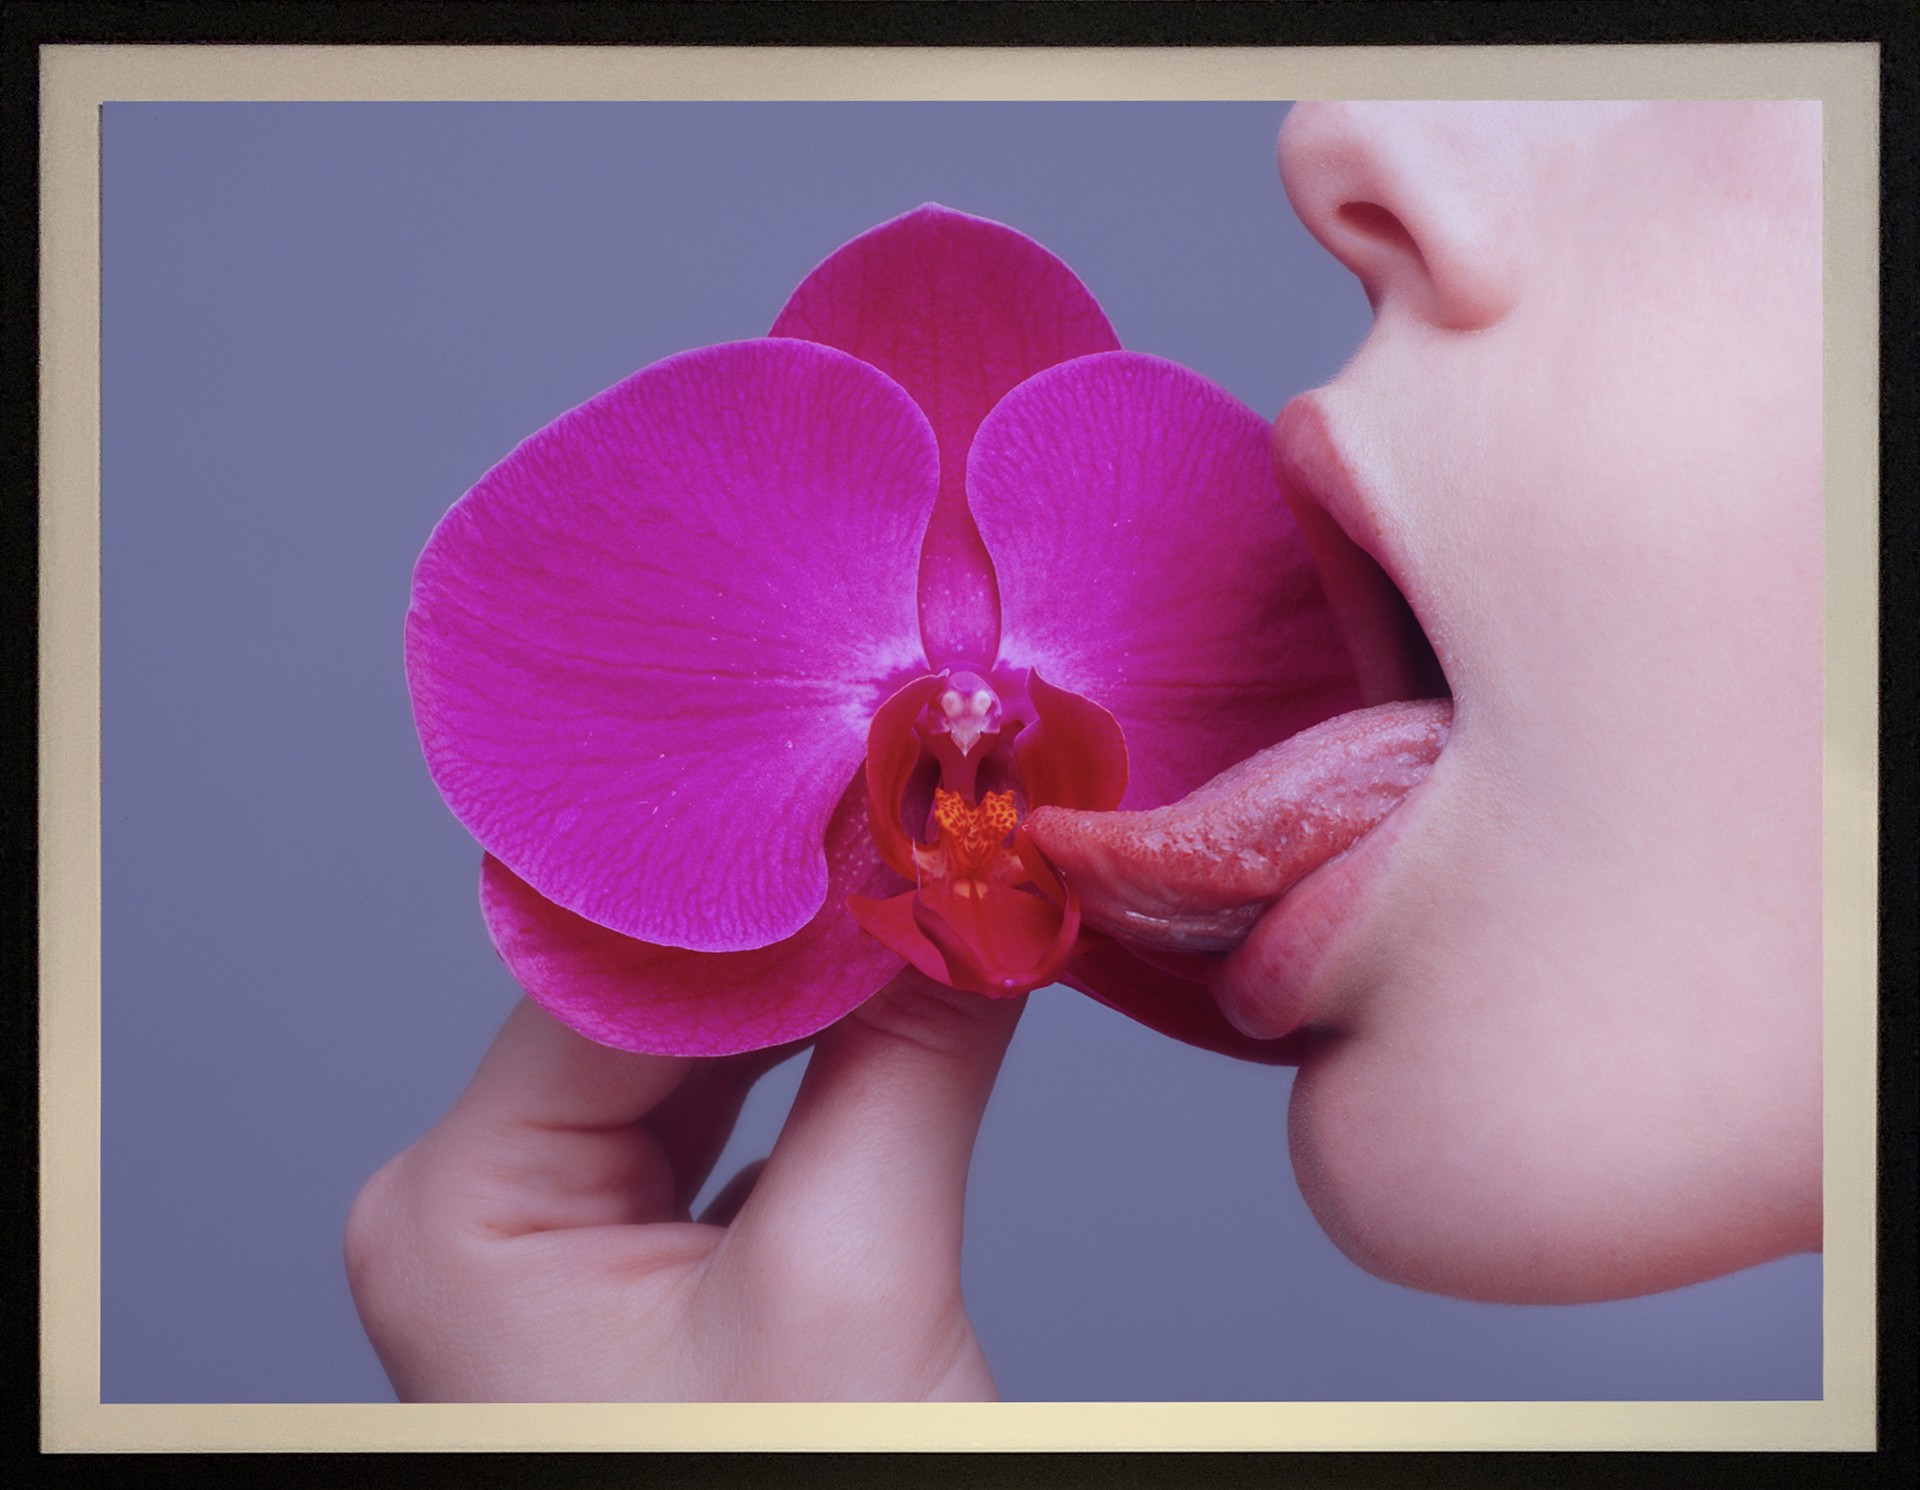 Orchid by Tyler Shields